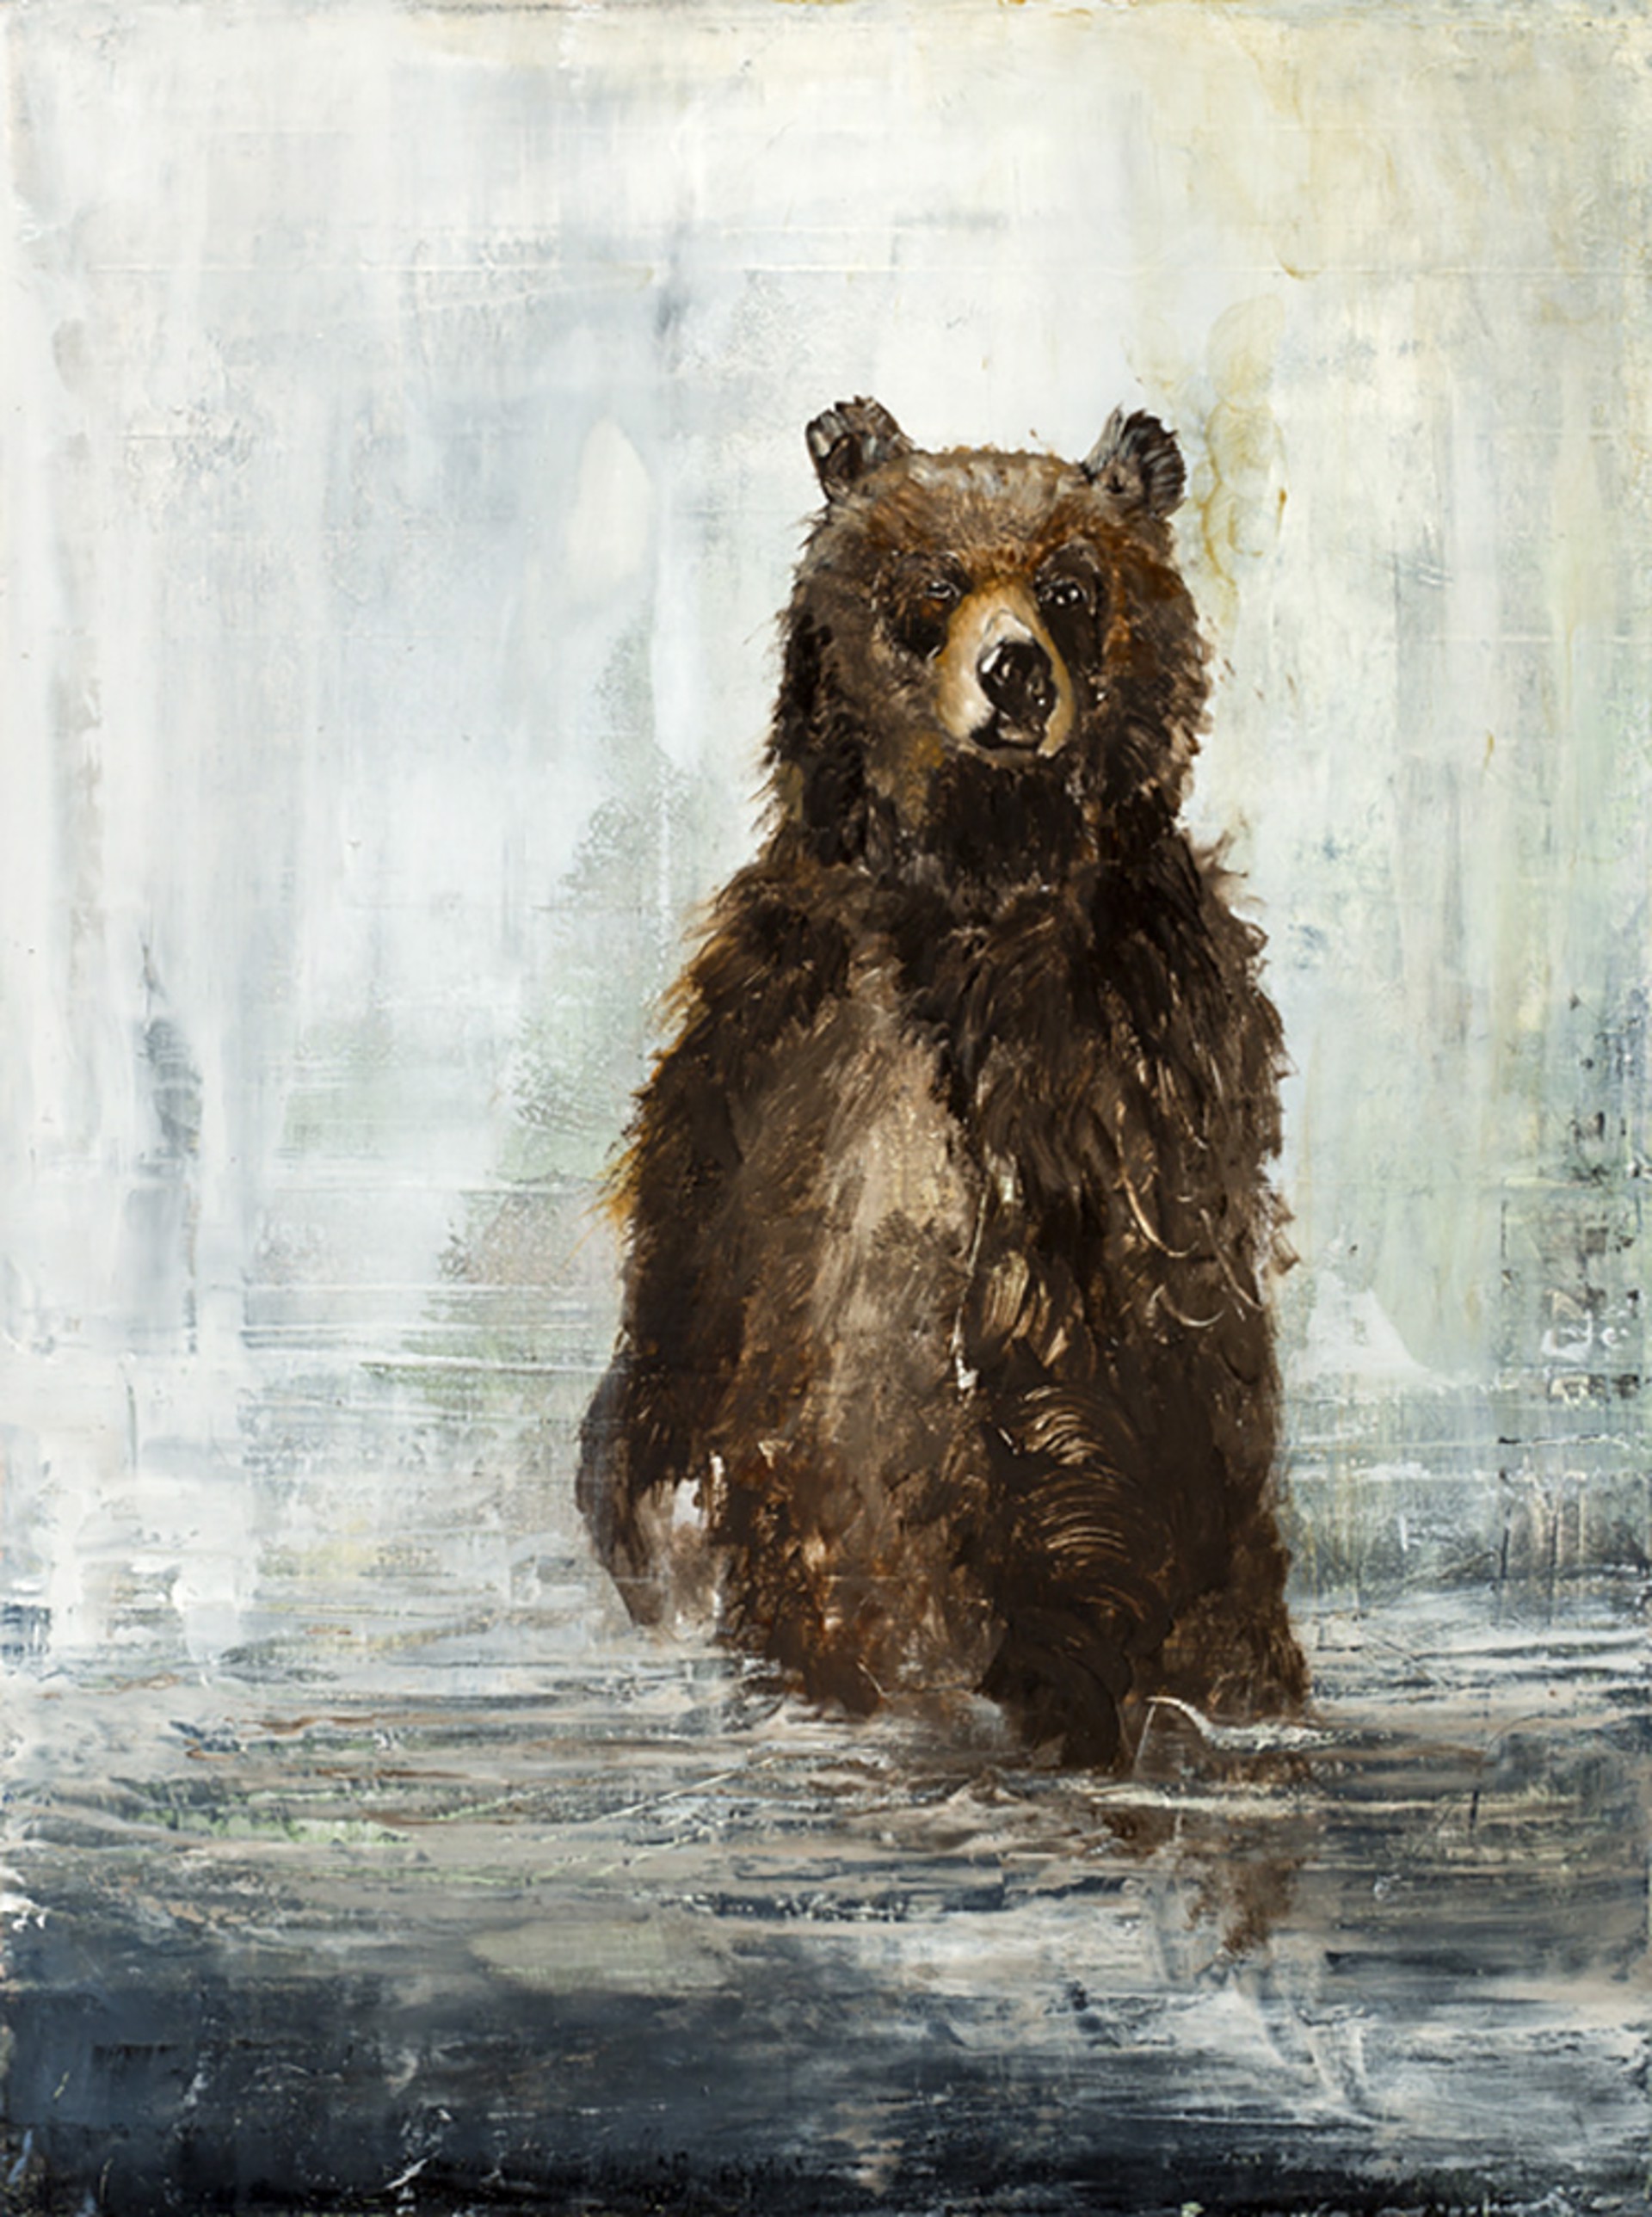 Oil Painting Of A Bear Standing In Water With An Abstract Background By Jenna Von Benedikt